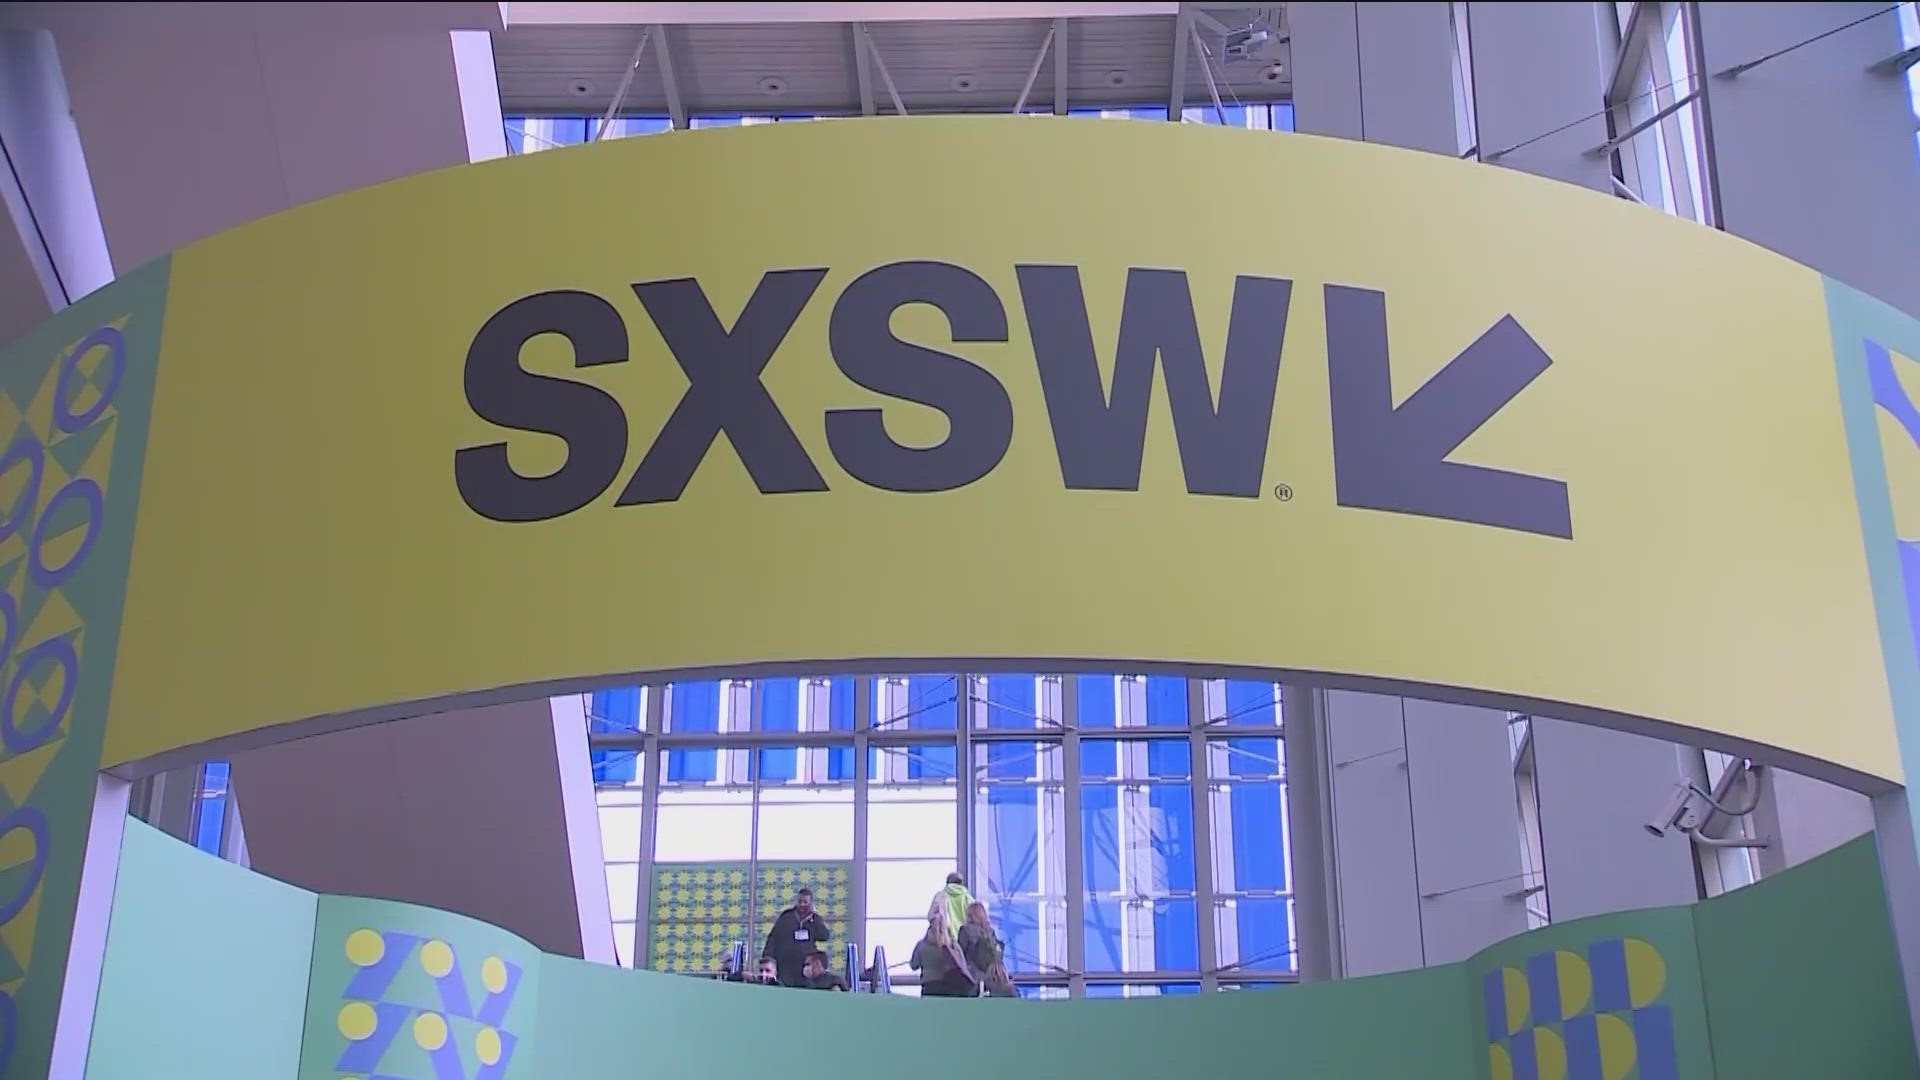 South by Southwest 2023 is just around the corner. Thousands of people from around the world will head to Austin to see guest speakers, exhibits and live music.